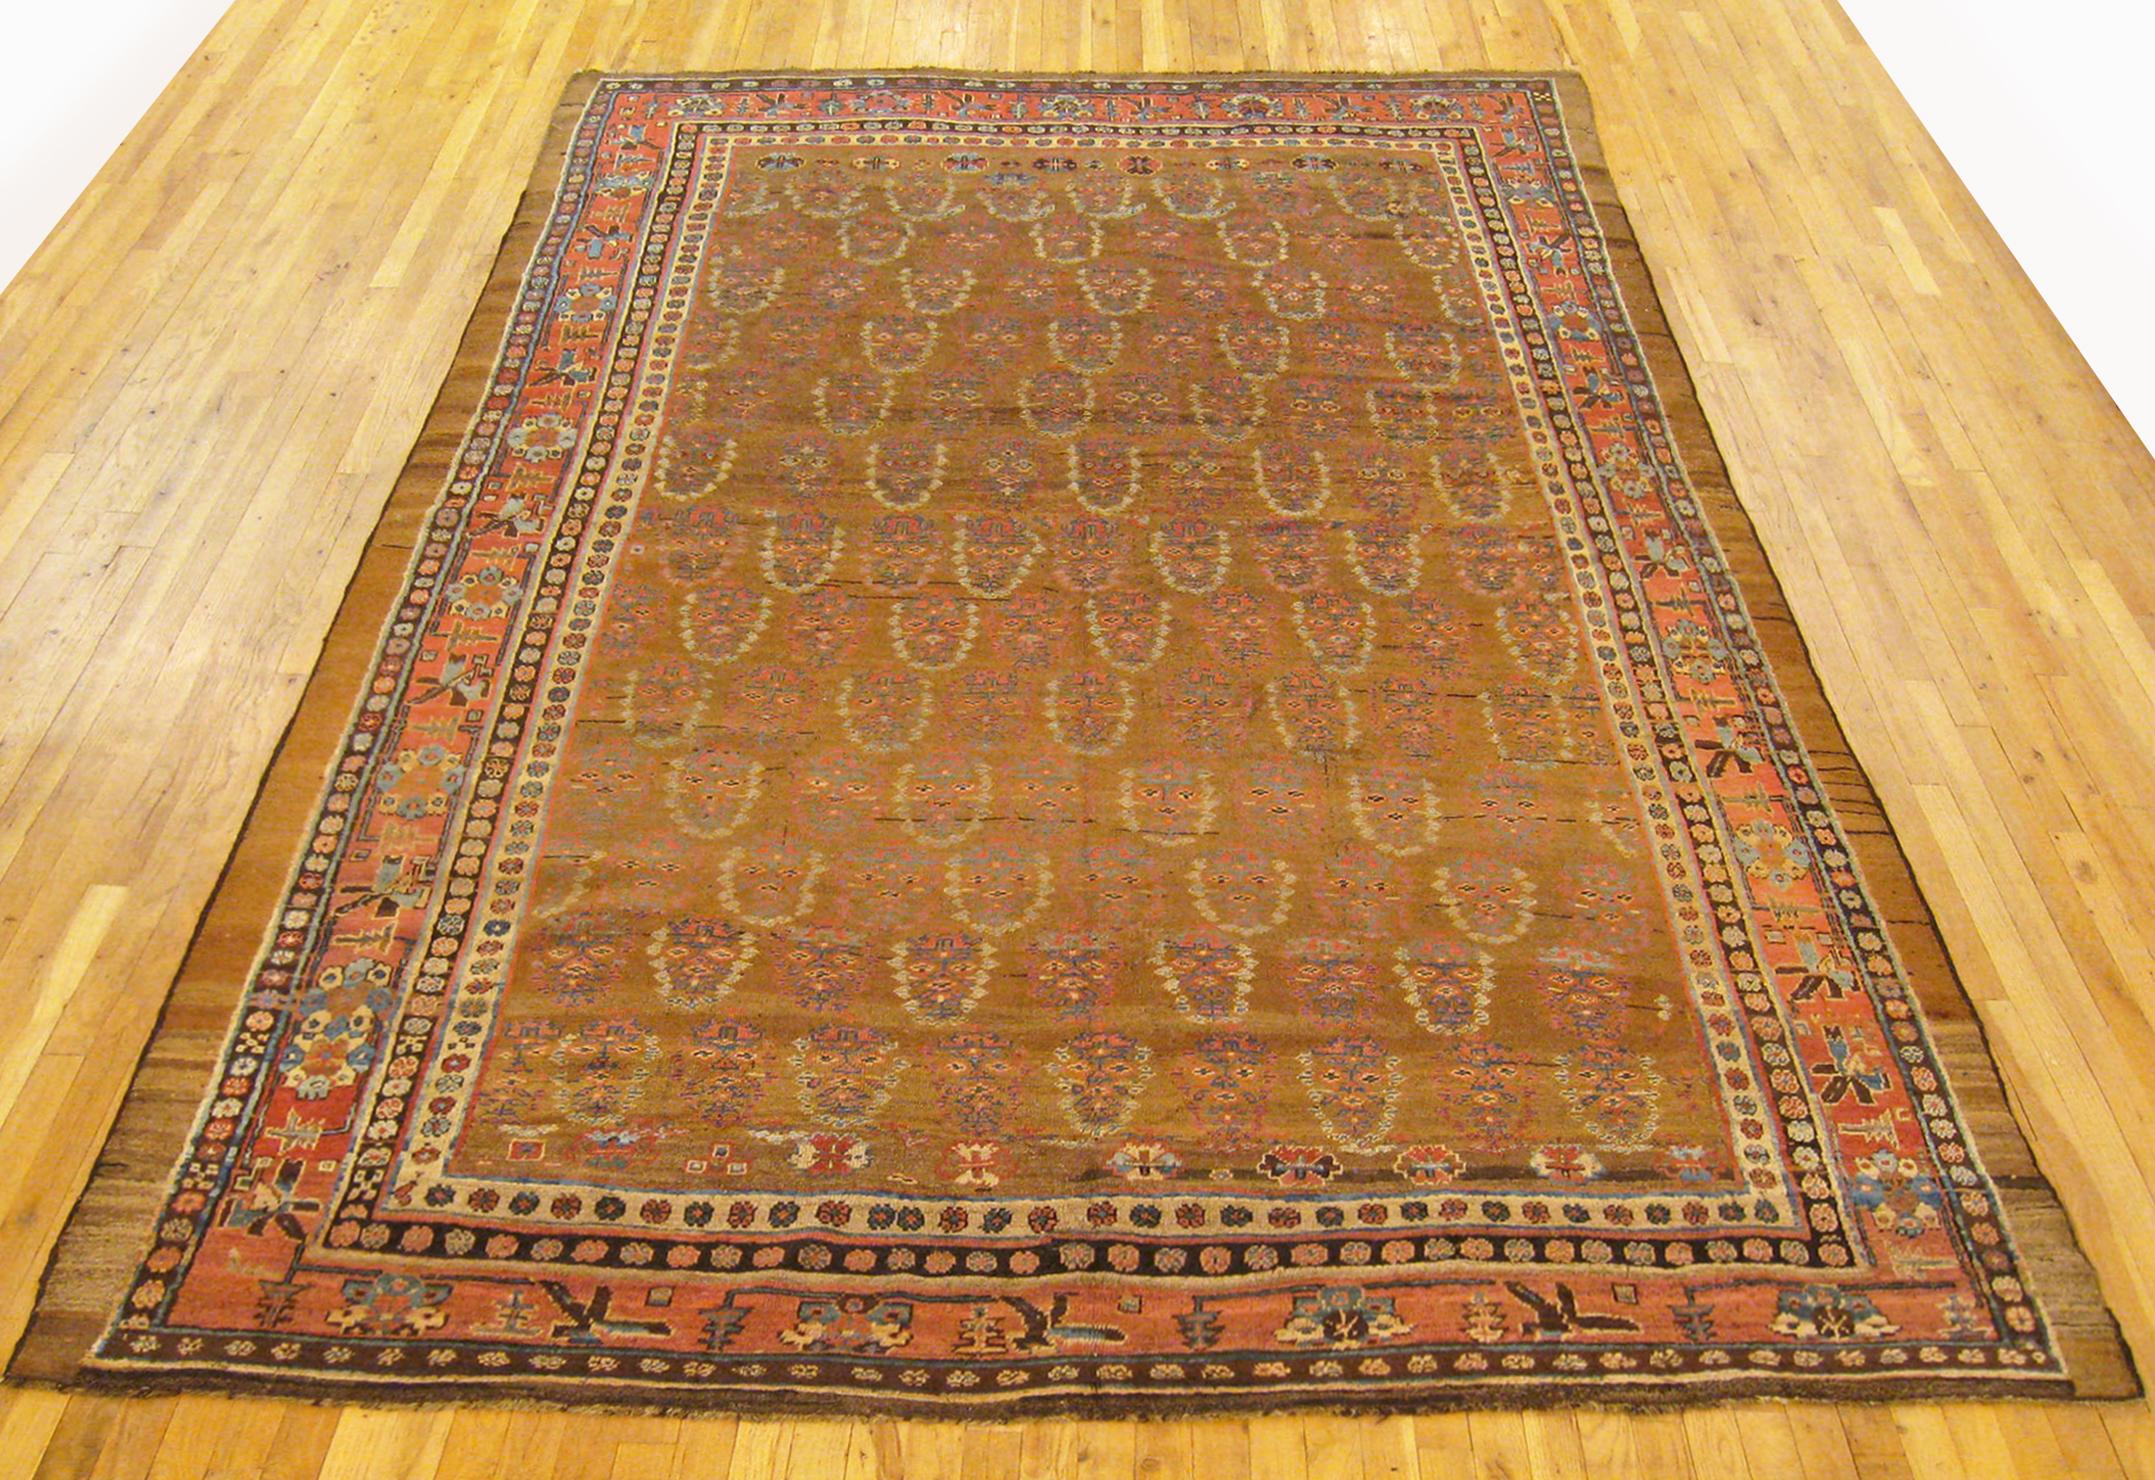 Antique Persian Bakshaish Oriental carpet, in Room Size with Soft Colors

A magnificent Persian Bakshaish oriental carpet, circa 1870, size 10'0